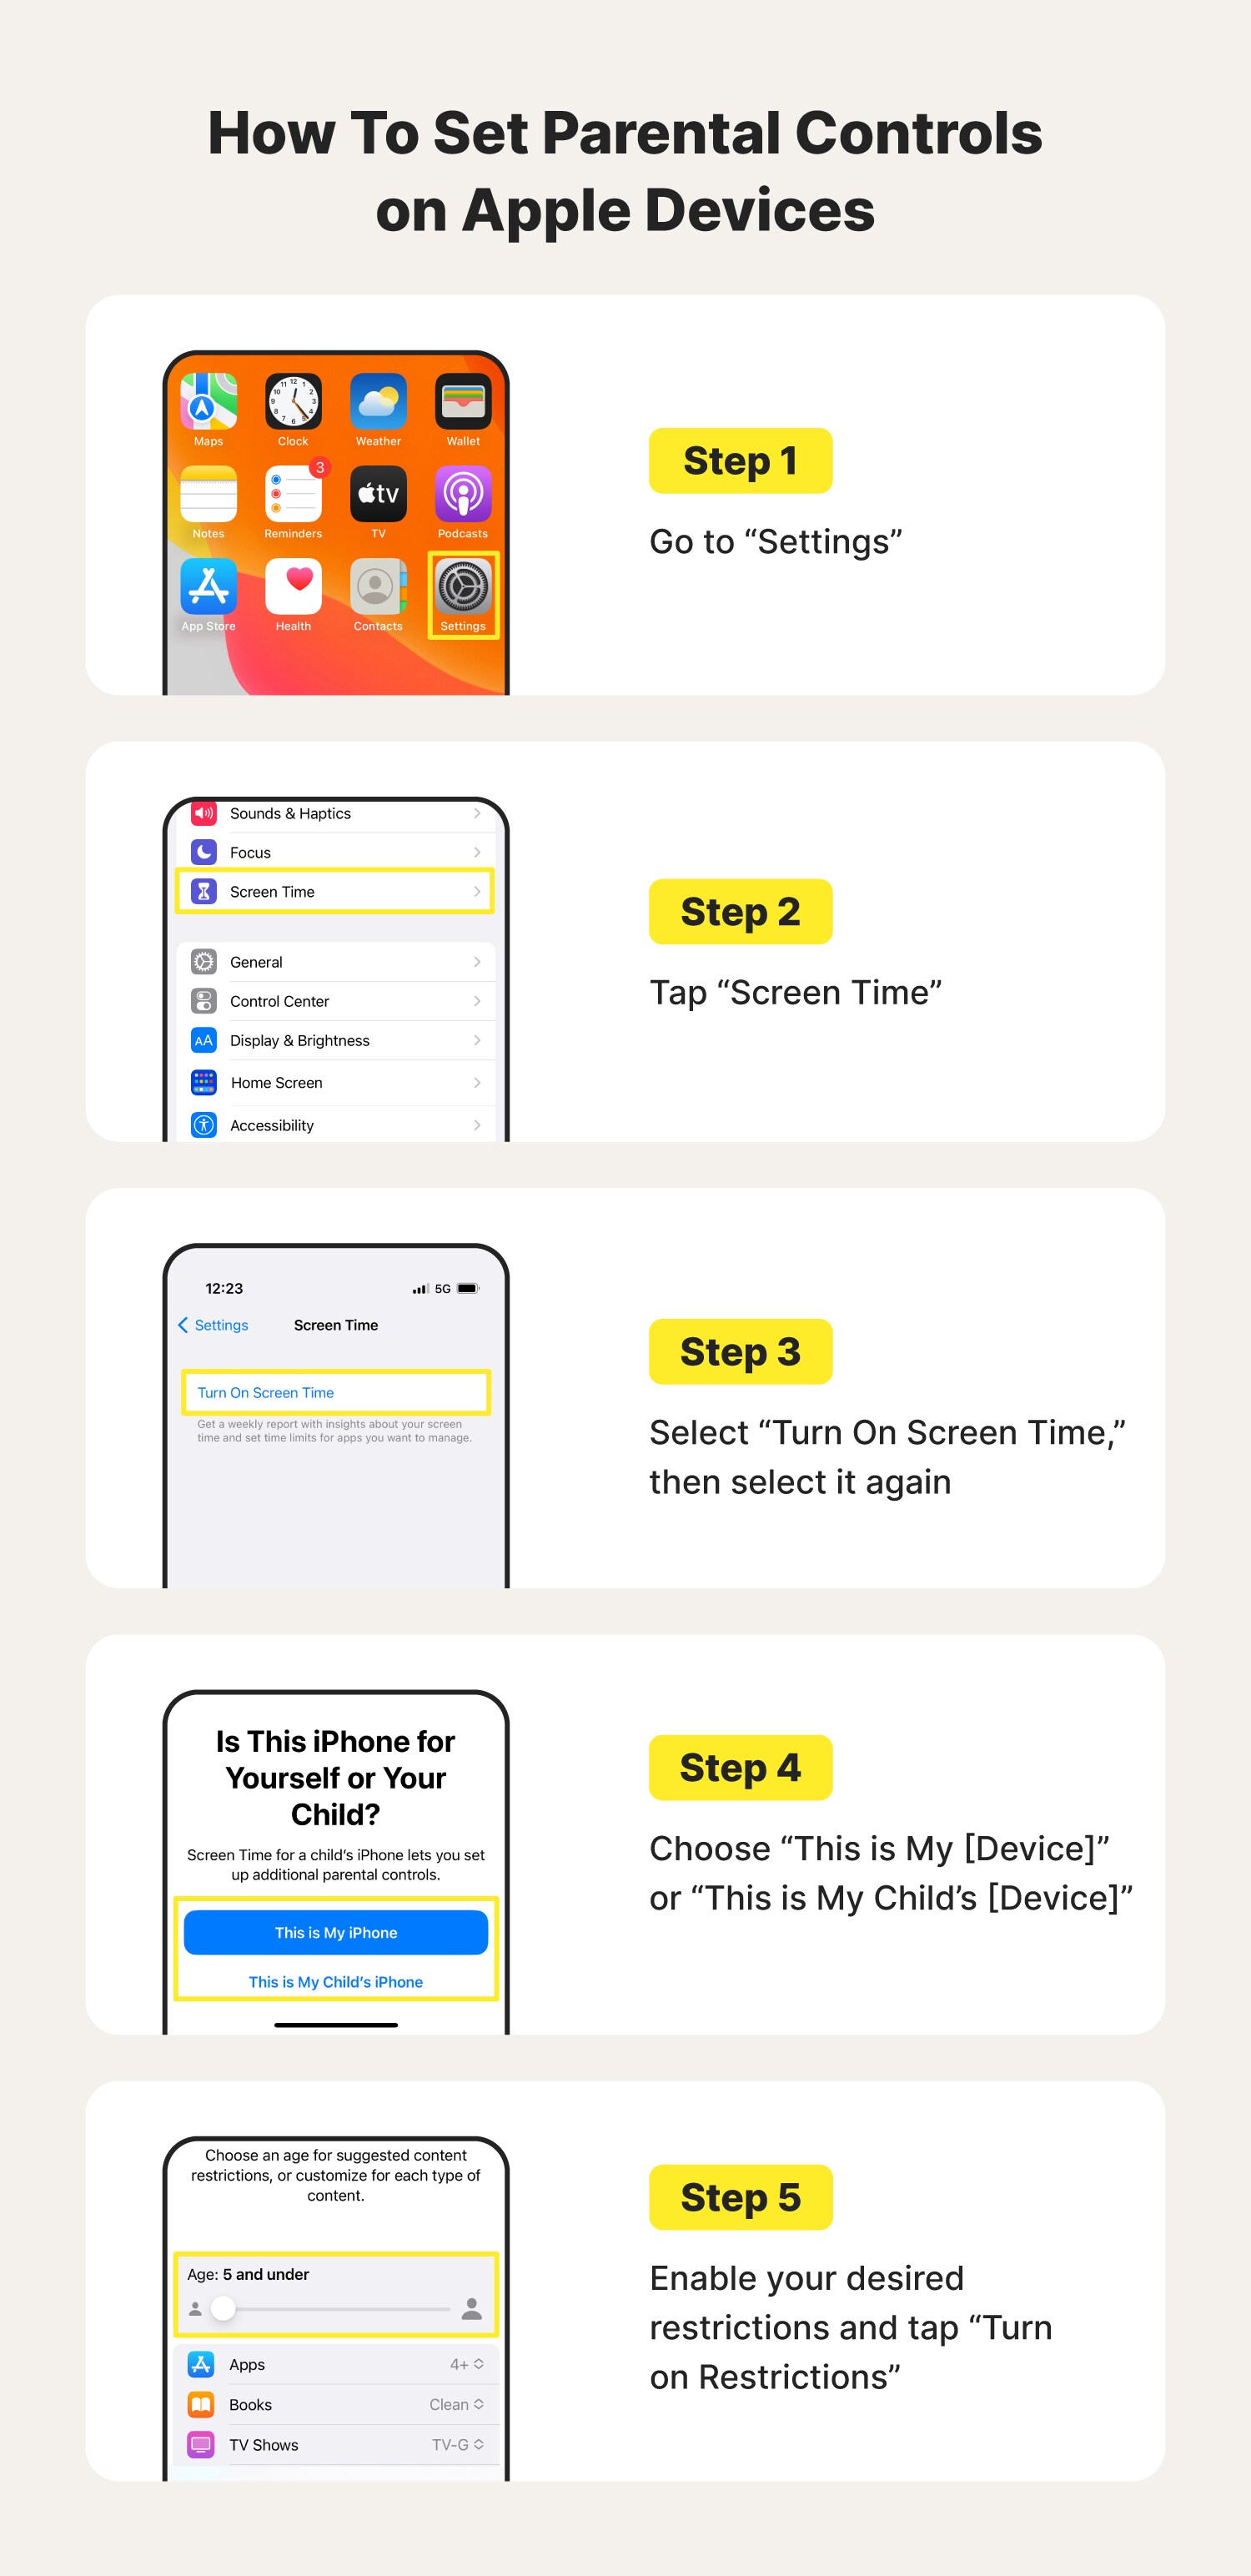 A graphic features step-by-step instructions on how to set parental controls on an Apple device.